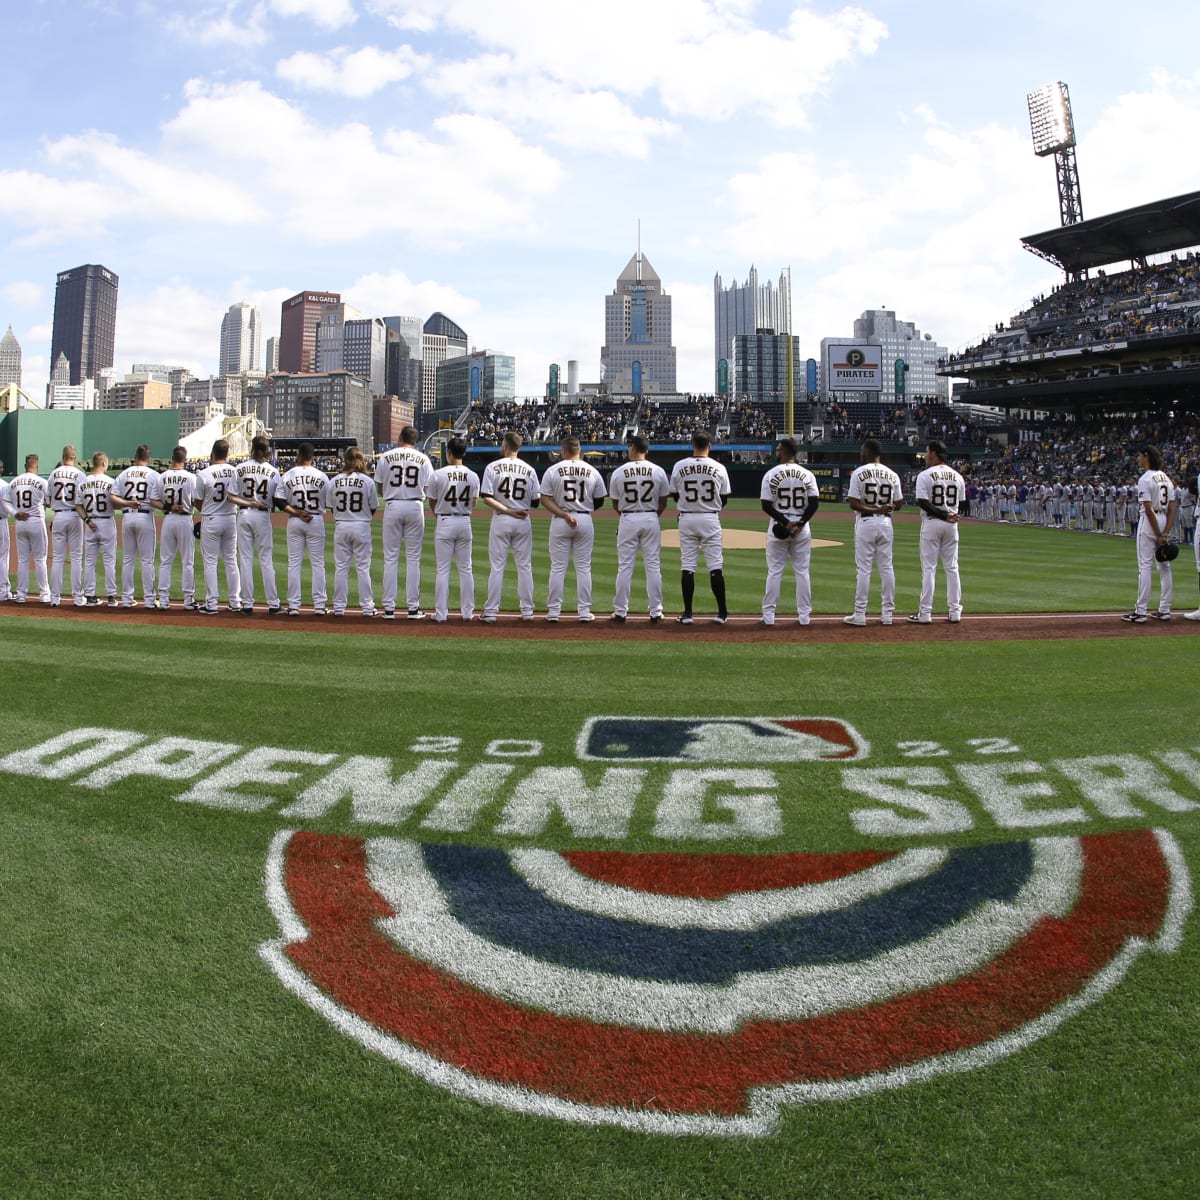 MLB releases 2023 schedule: All 30 teams will face each other in